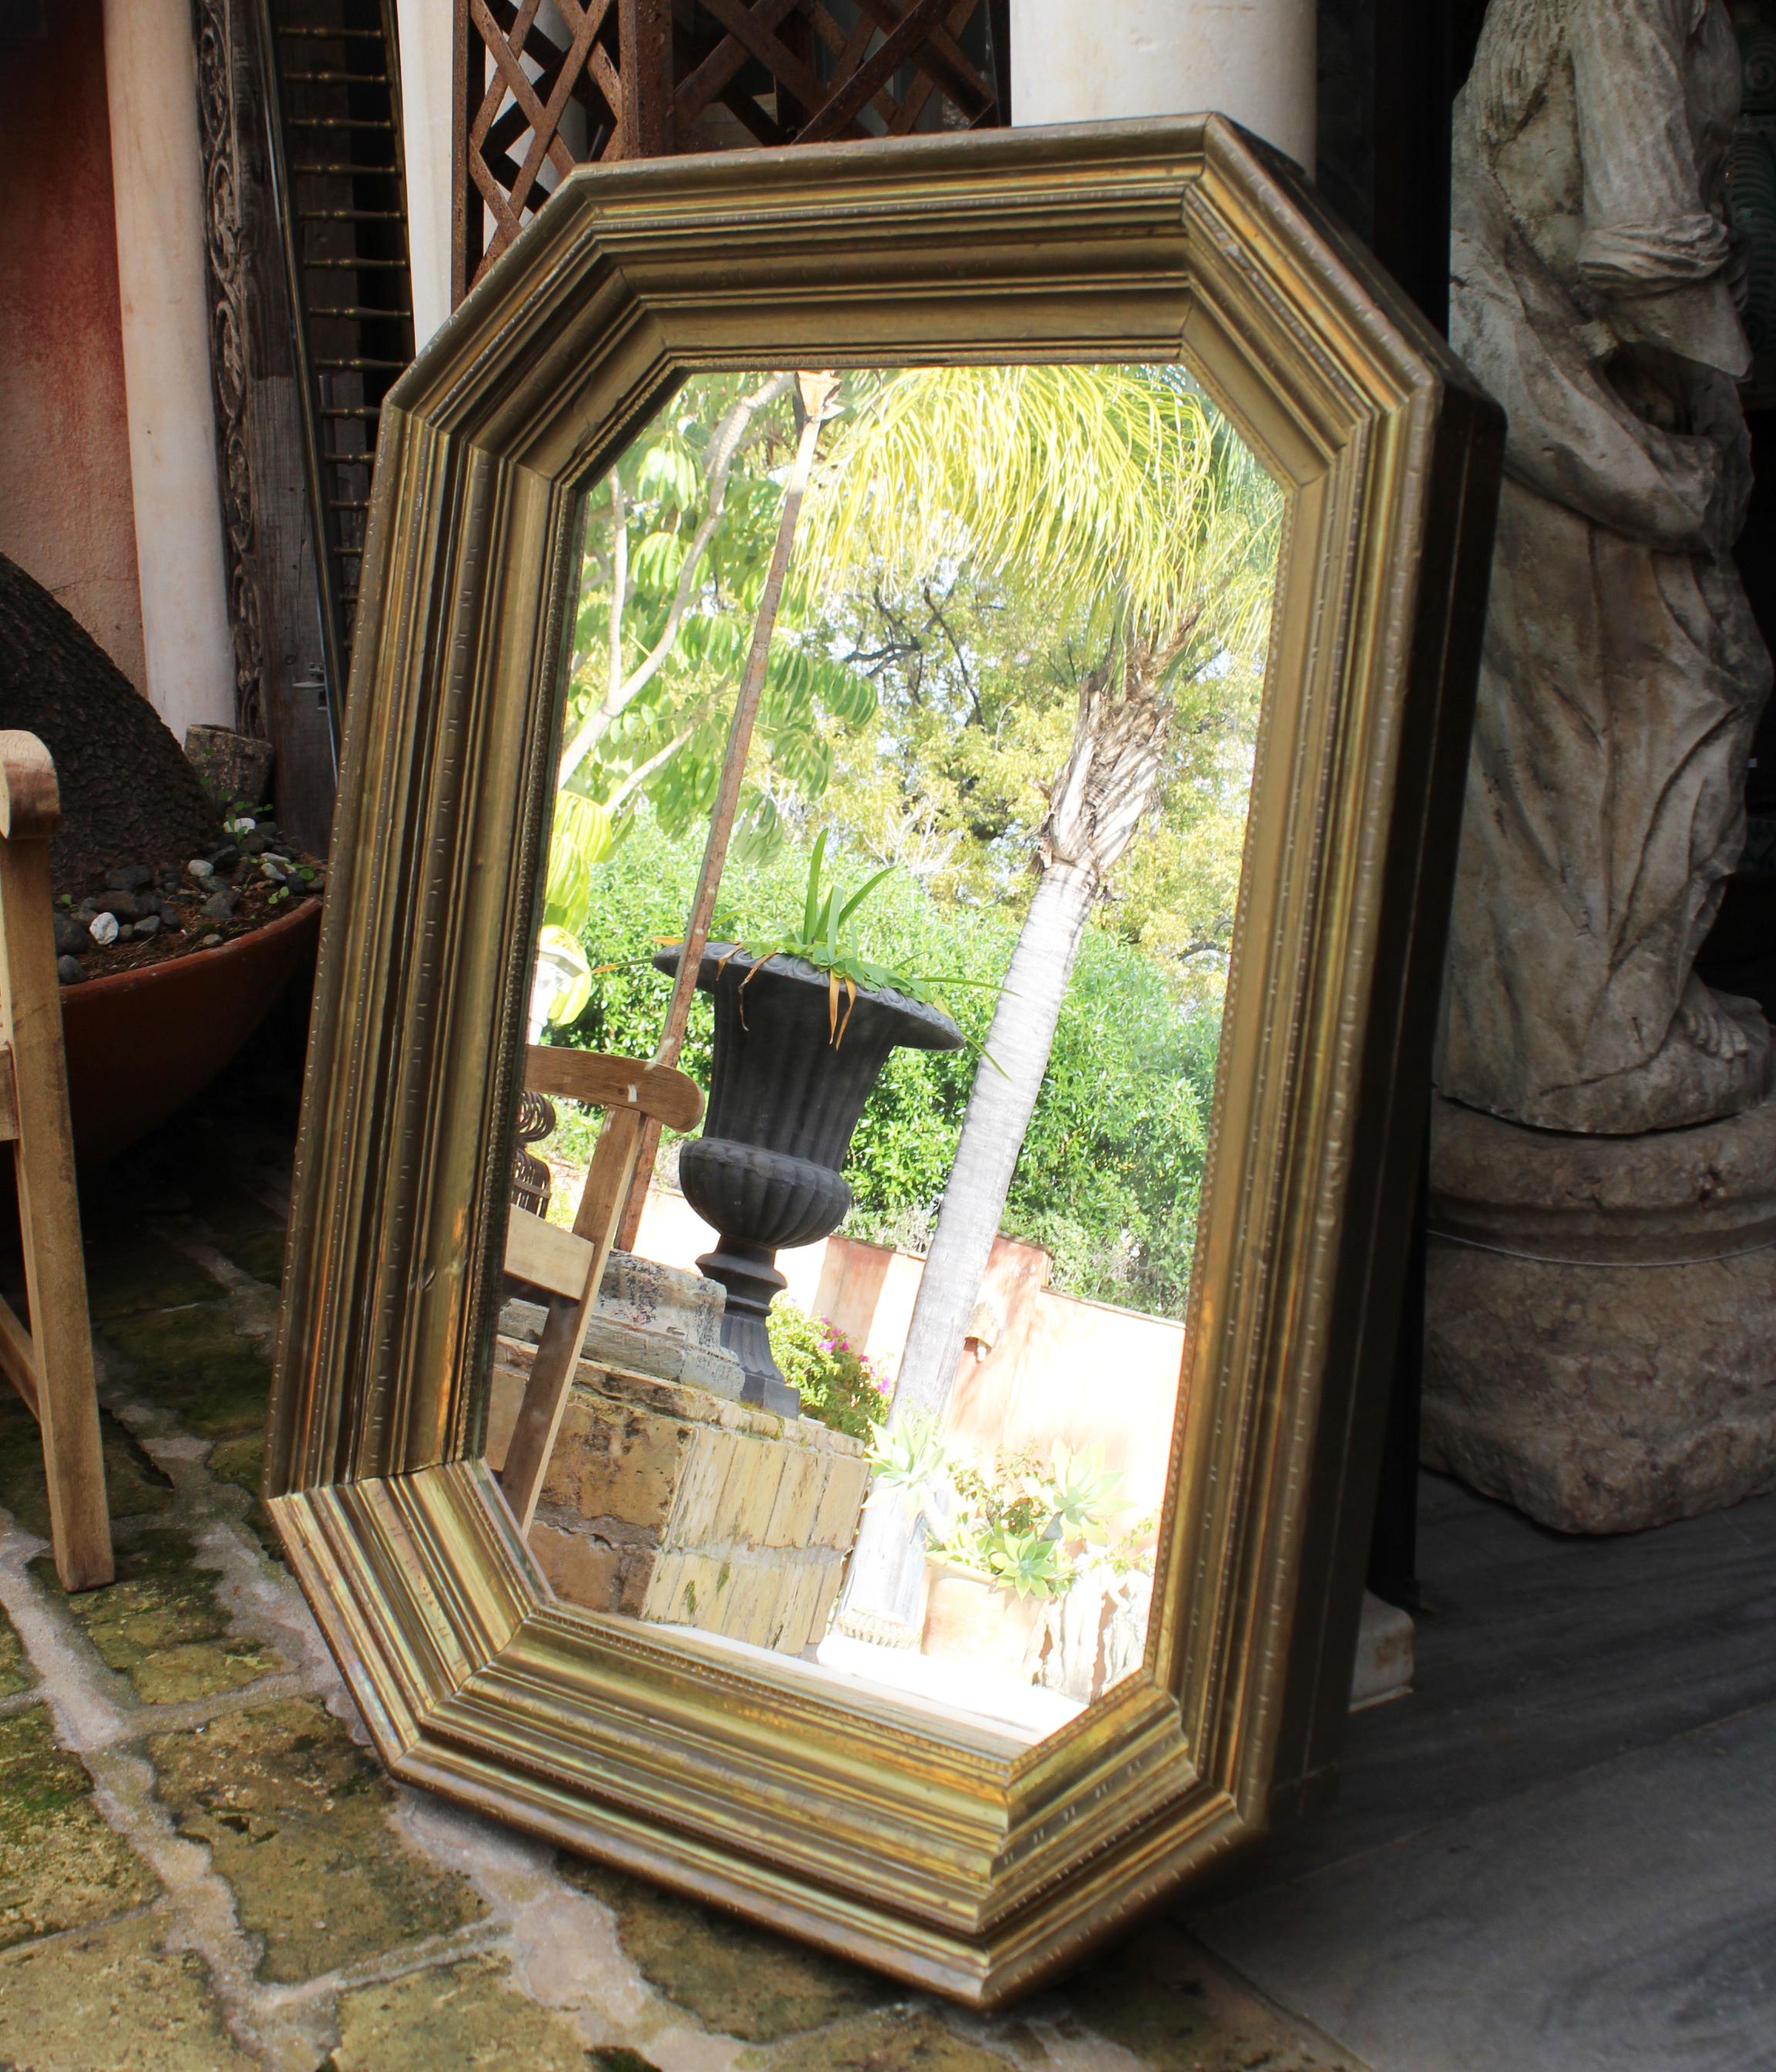 1970s handcrafted gilded brass panels stamped over a wooden frame mirror by Rodolfo Dubarry's workshop in Marbella. 

50 years ago, Argentinian furniture designer Rodolfo Dubarry set up a workshop in Spain and popularized the use of gilded brass